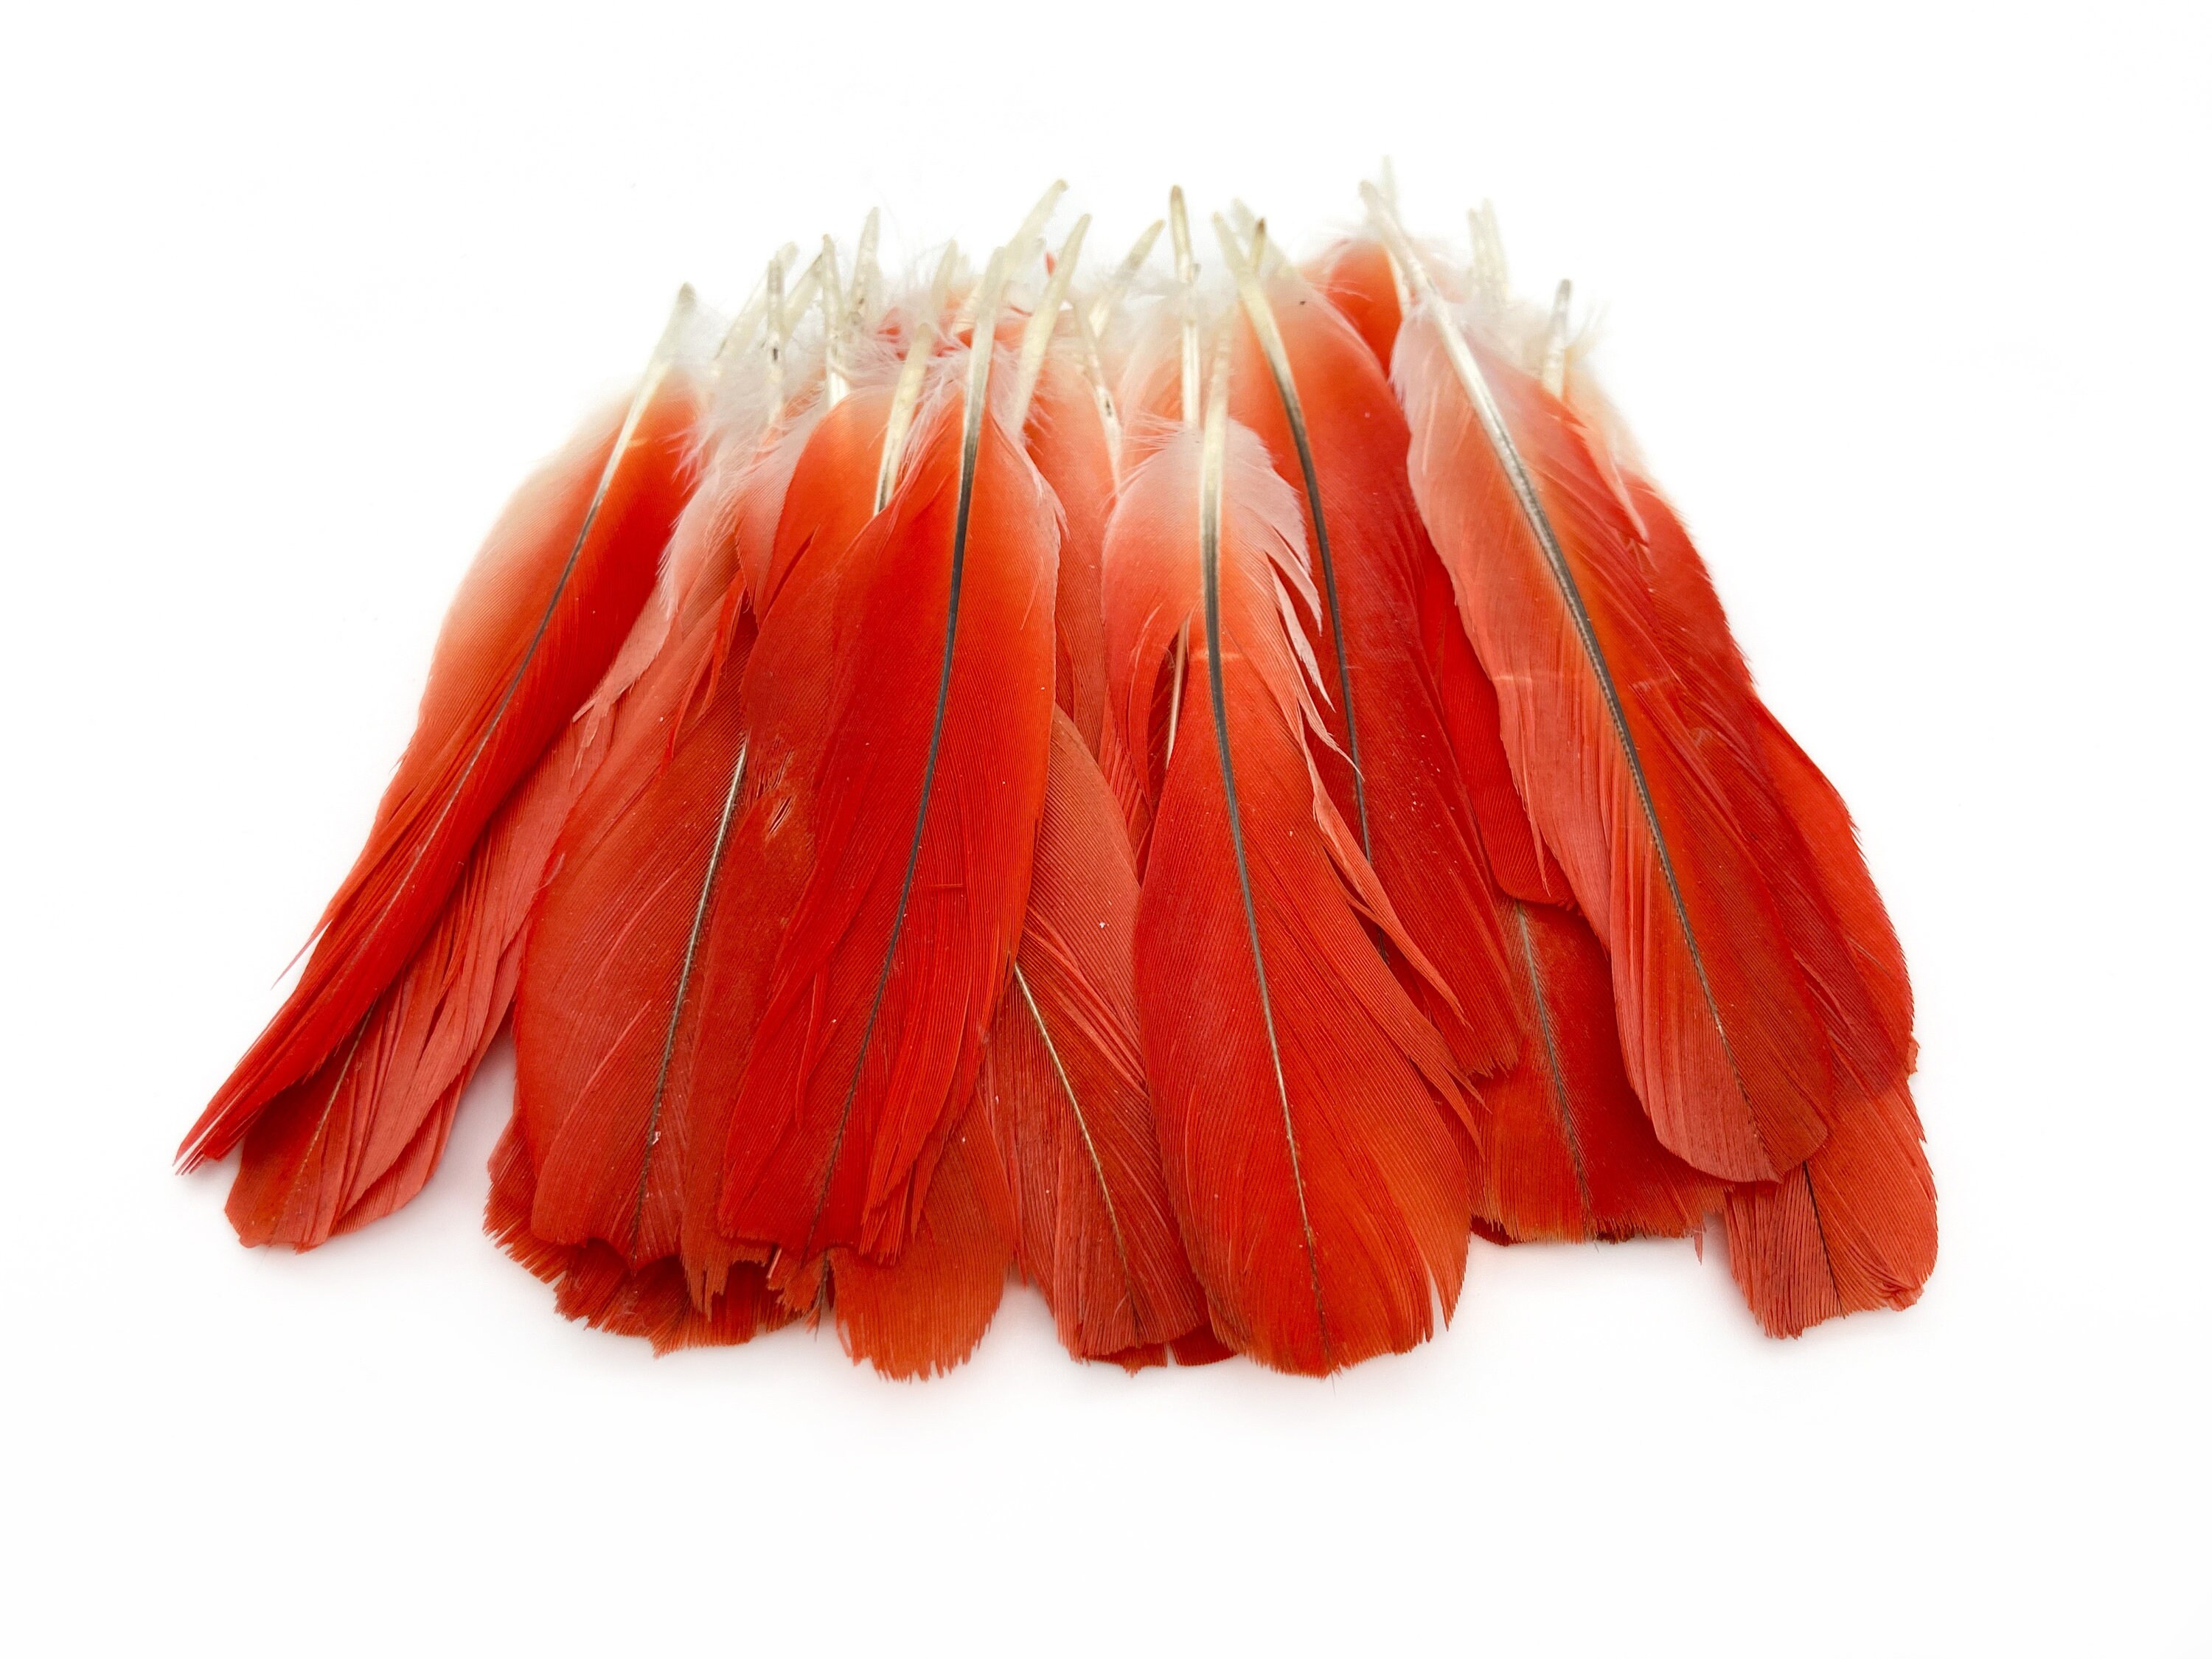 6 Pieces - 1-2 Natural Red Small African Grey Parrot Body Plumage Feathers  - Rare- Fly Tying Craft Supply| Moonlight Feather